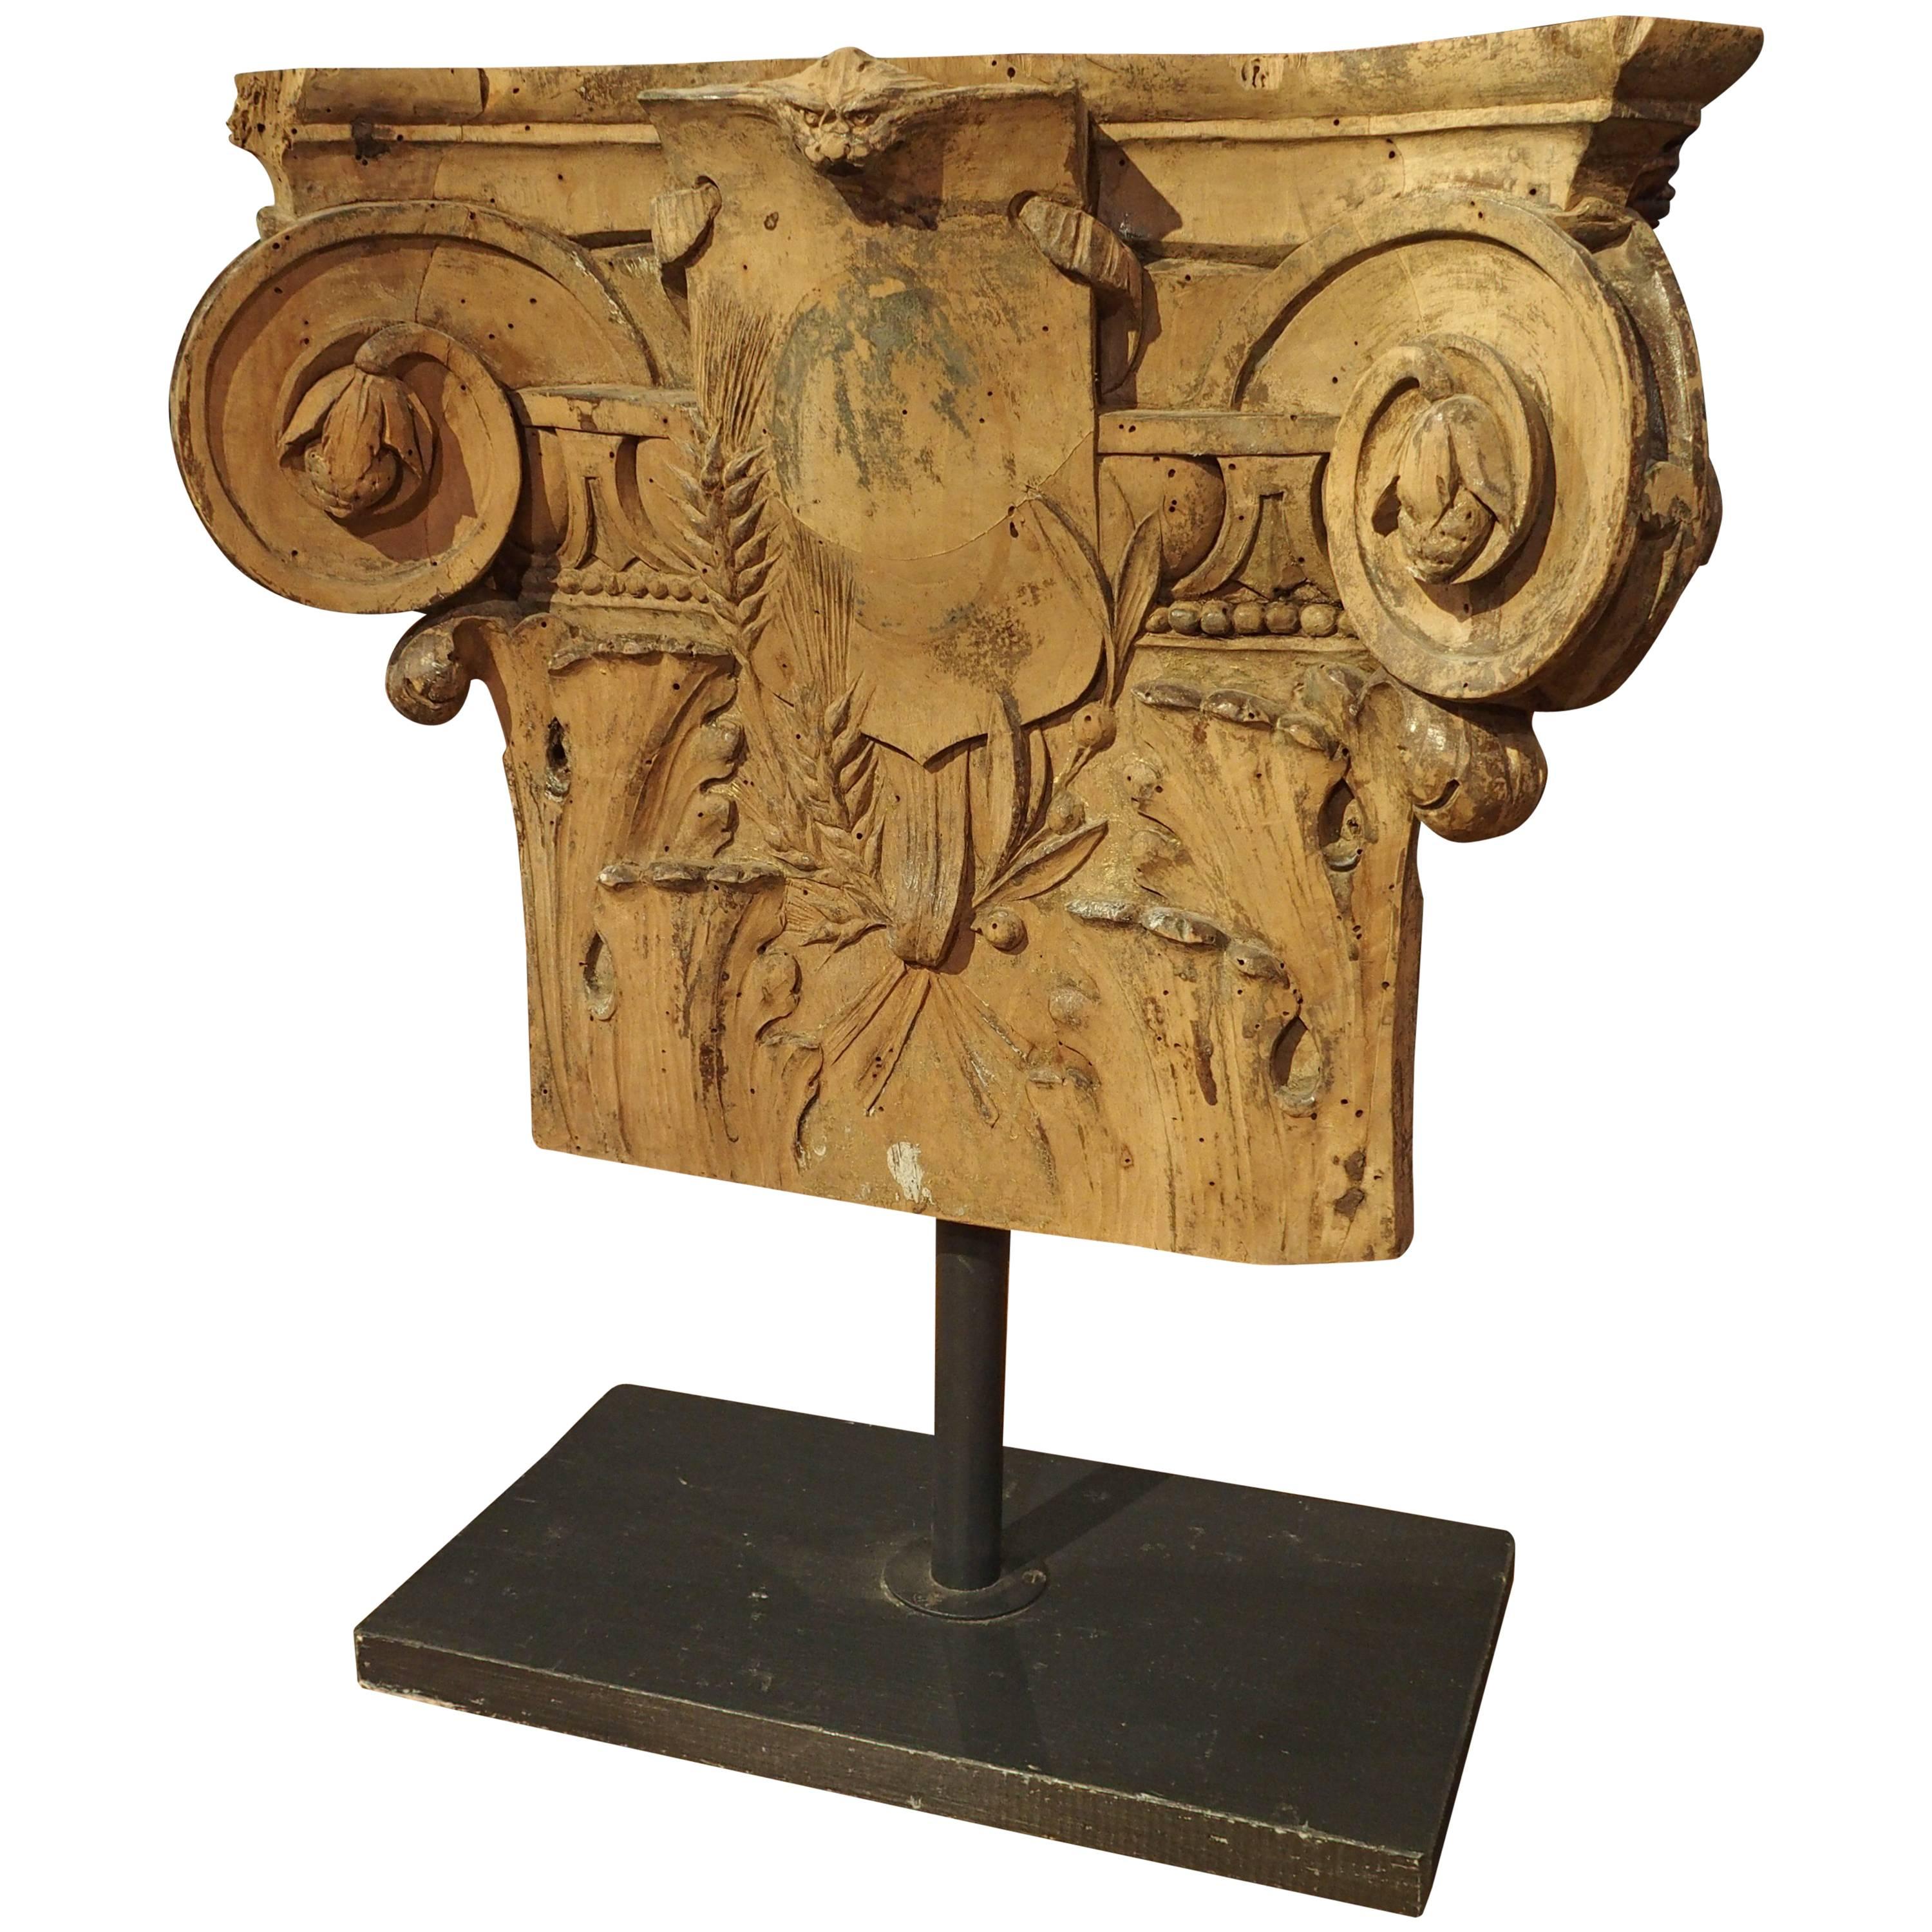 Stripped and Mounted Antique Pilaster Capital from France, circa 1850